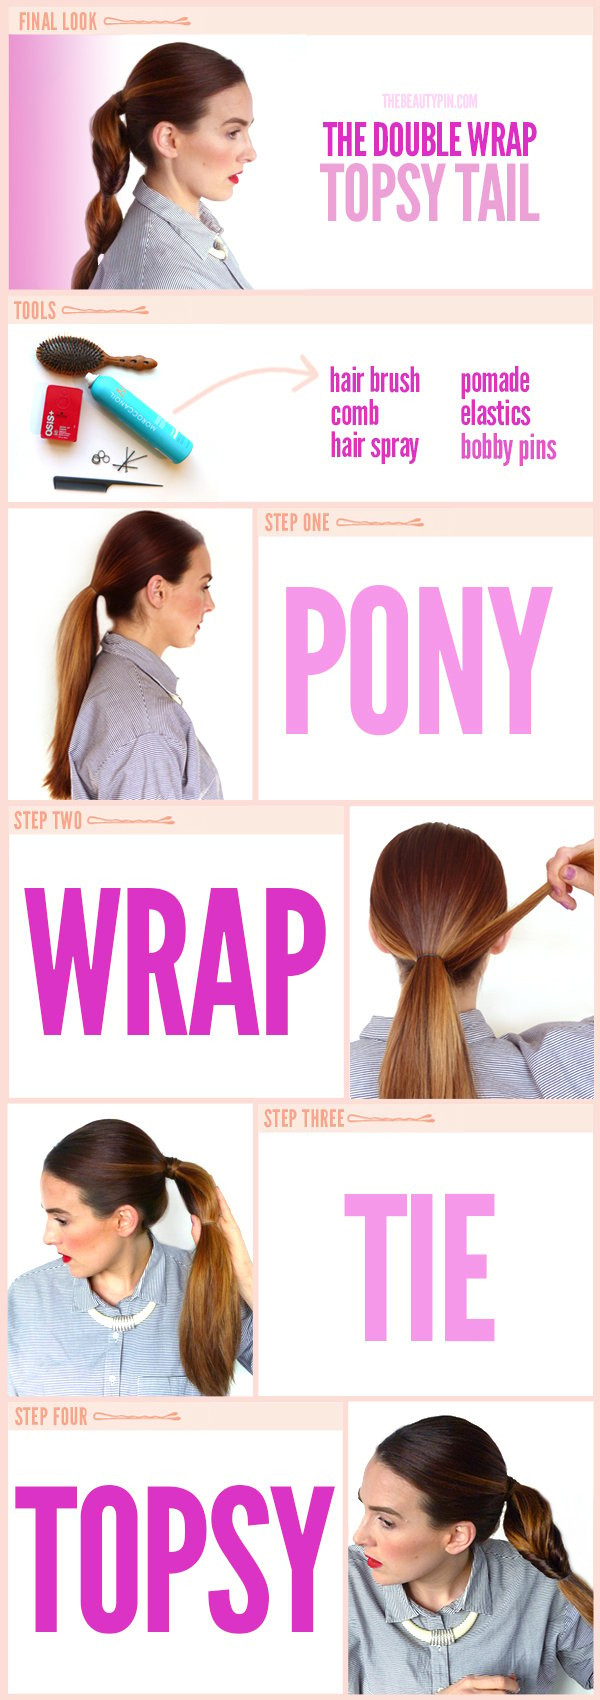 The Double Wrap Topsy Tail Tutorial